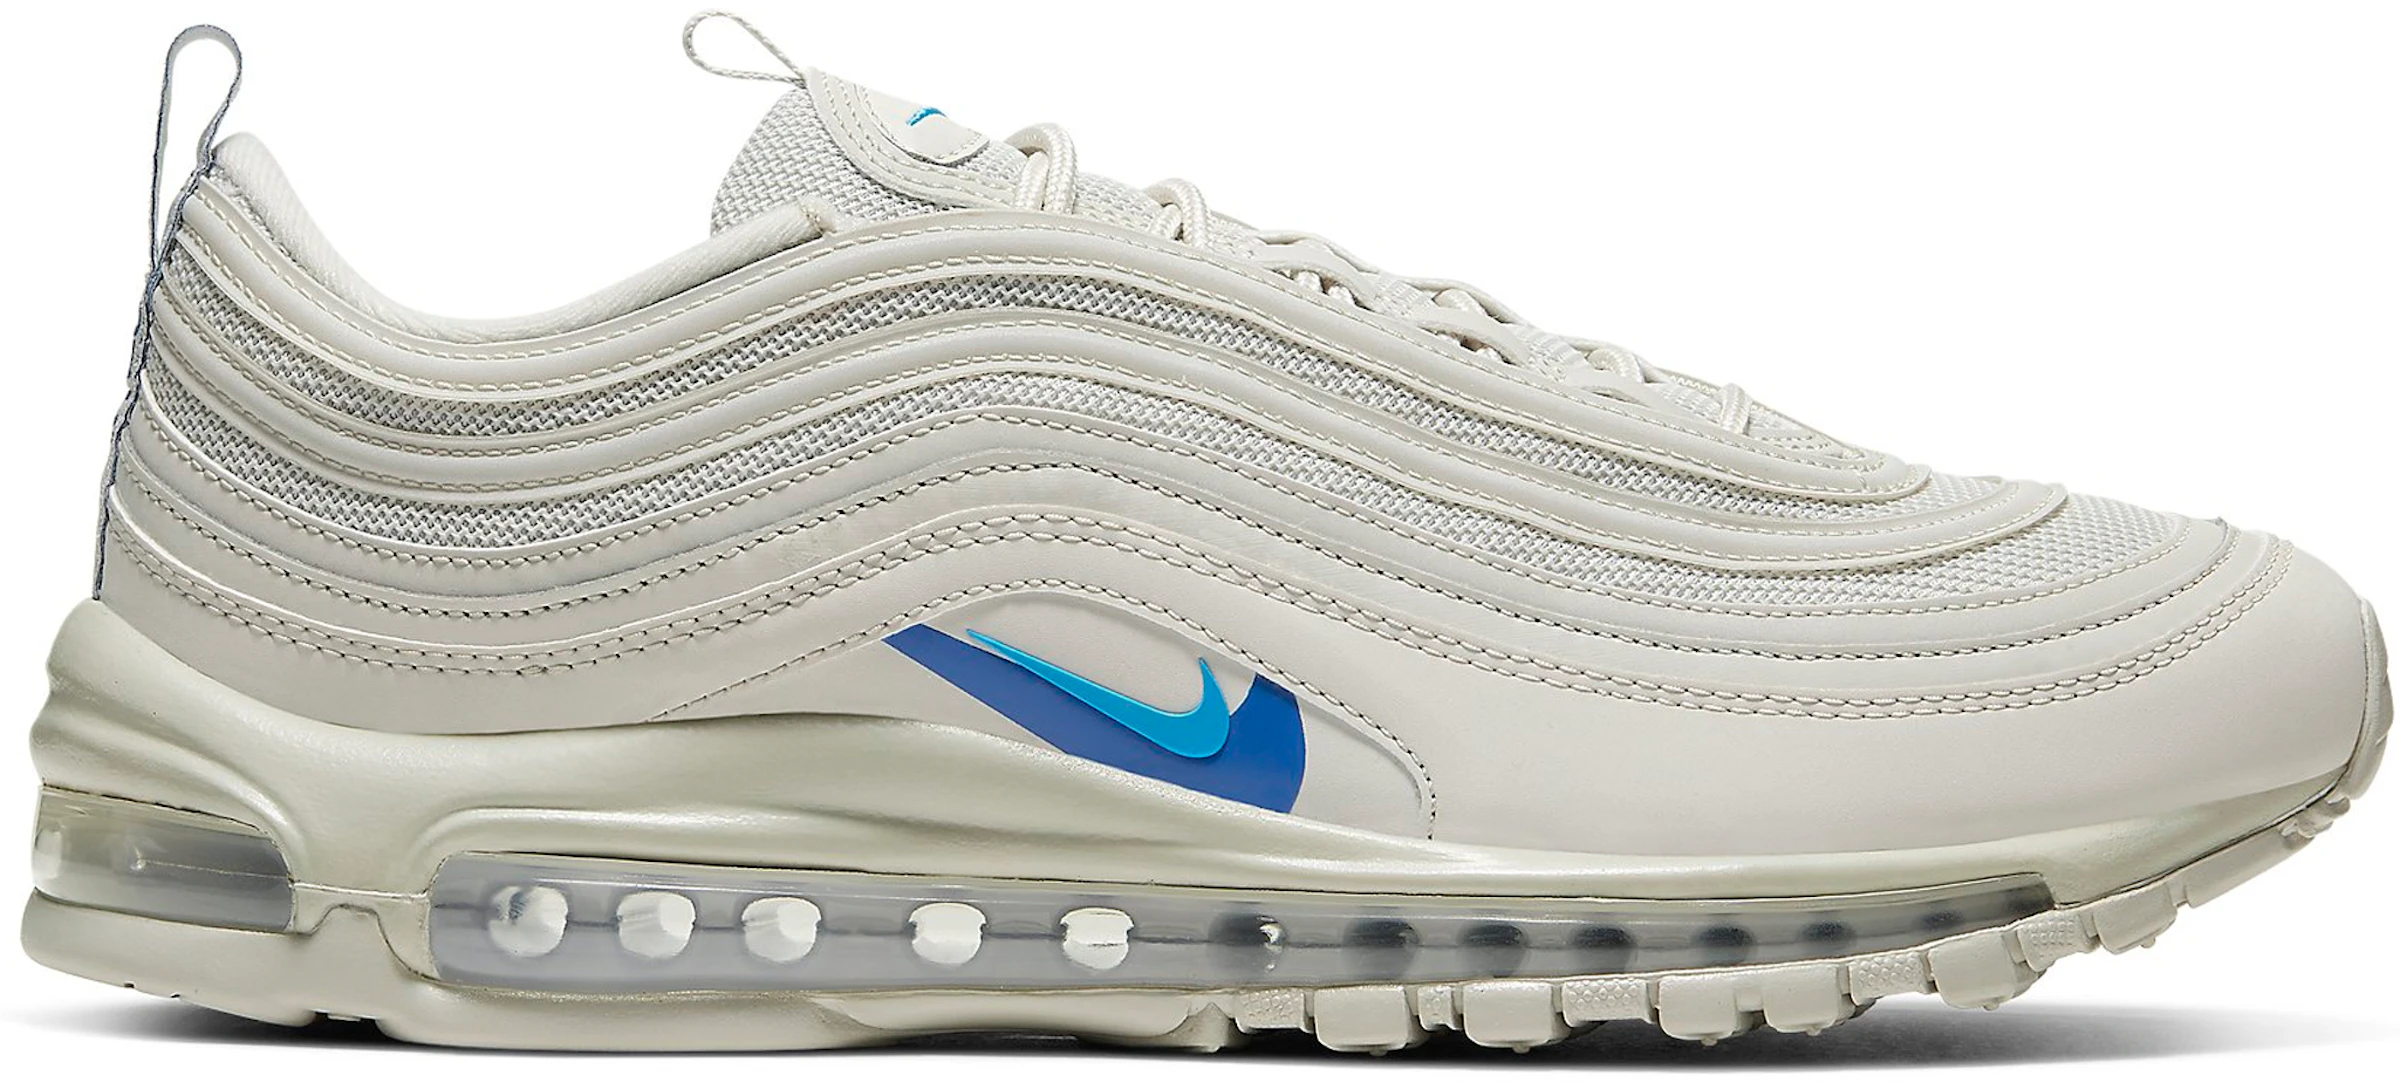 Nike Air Max 97 Just Do It Pack White (2019) - CT2205-001 US